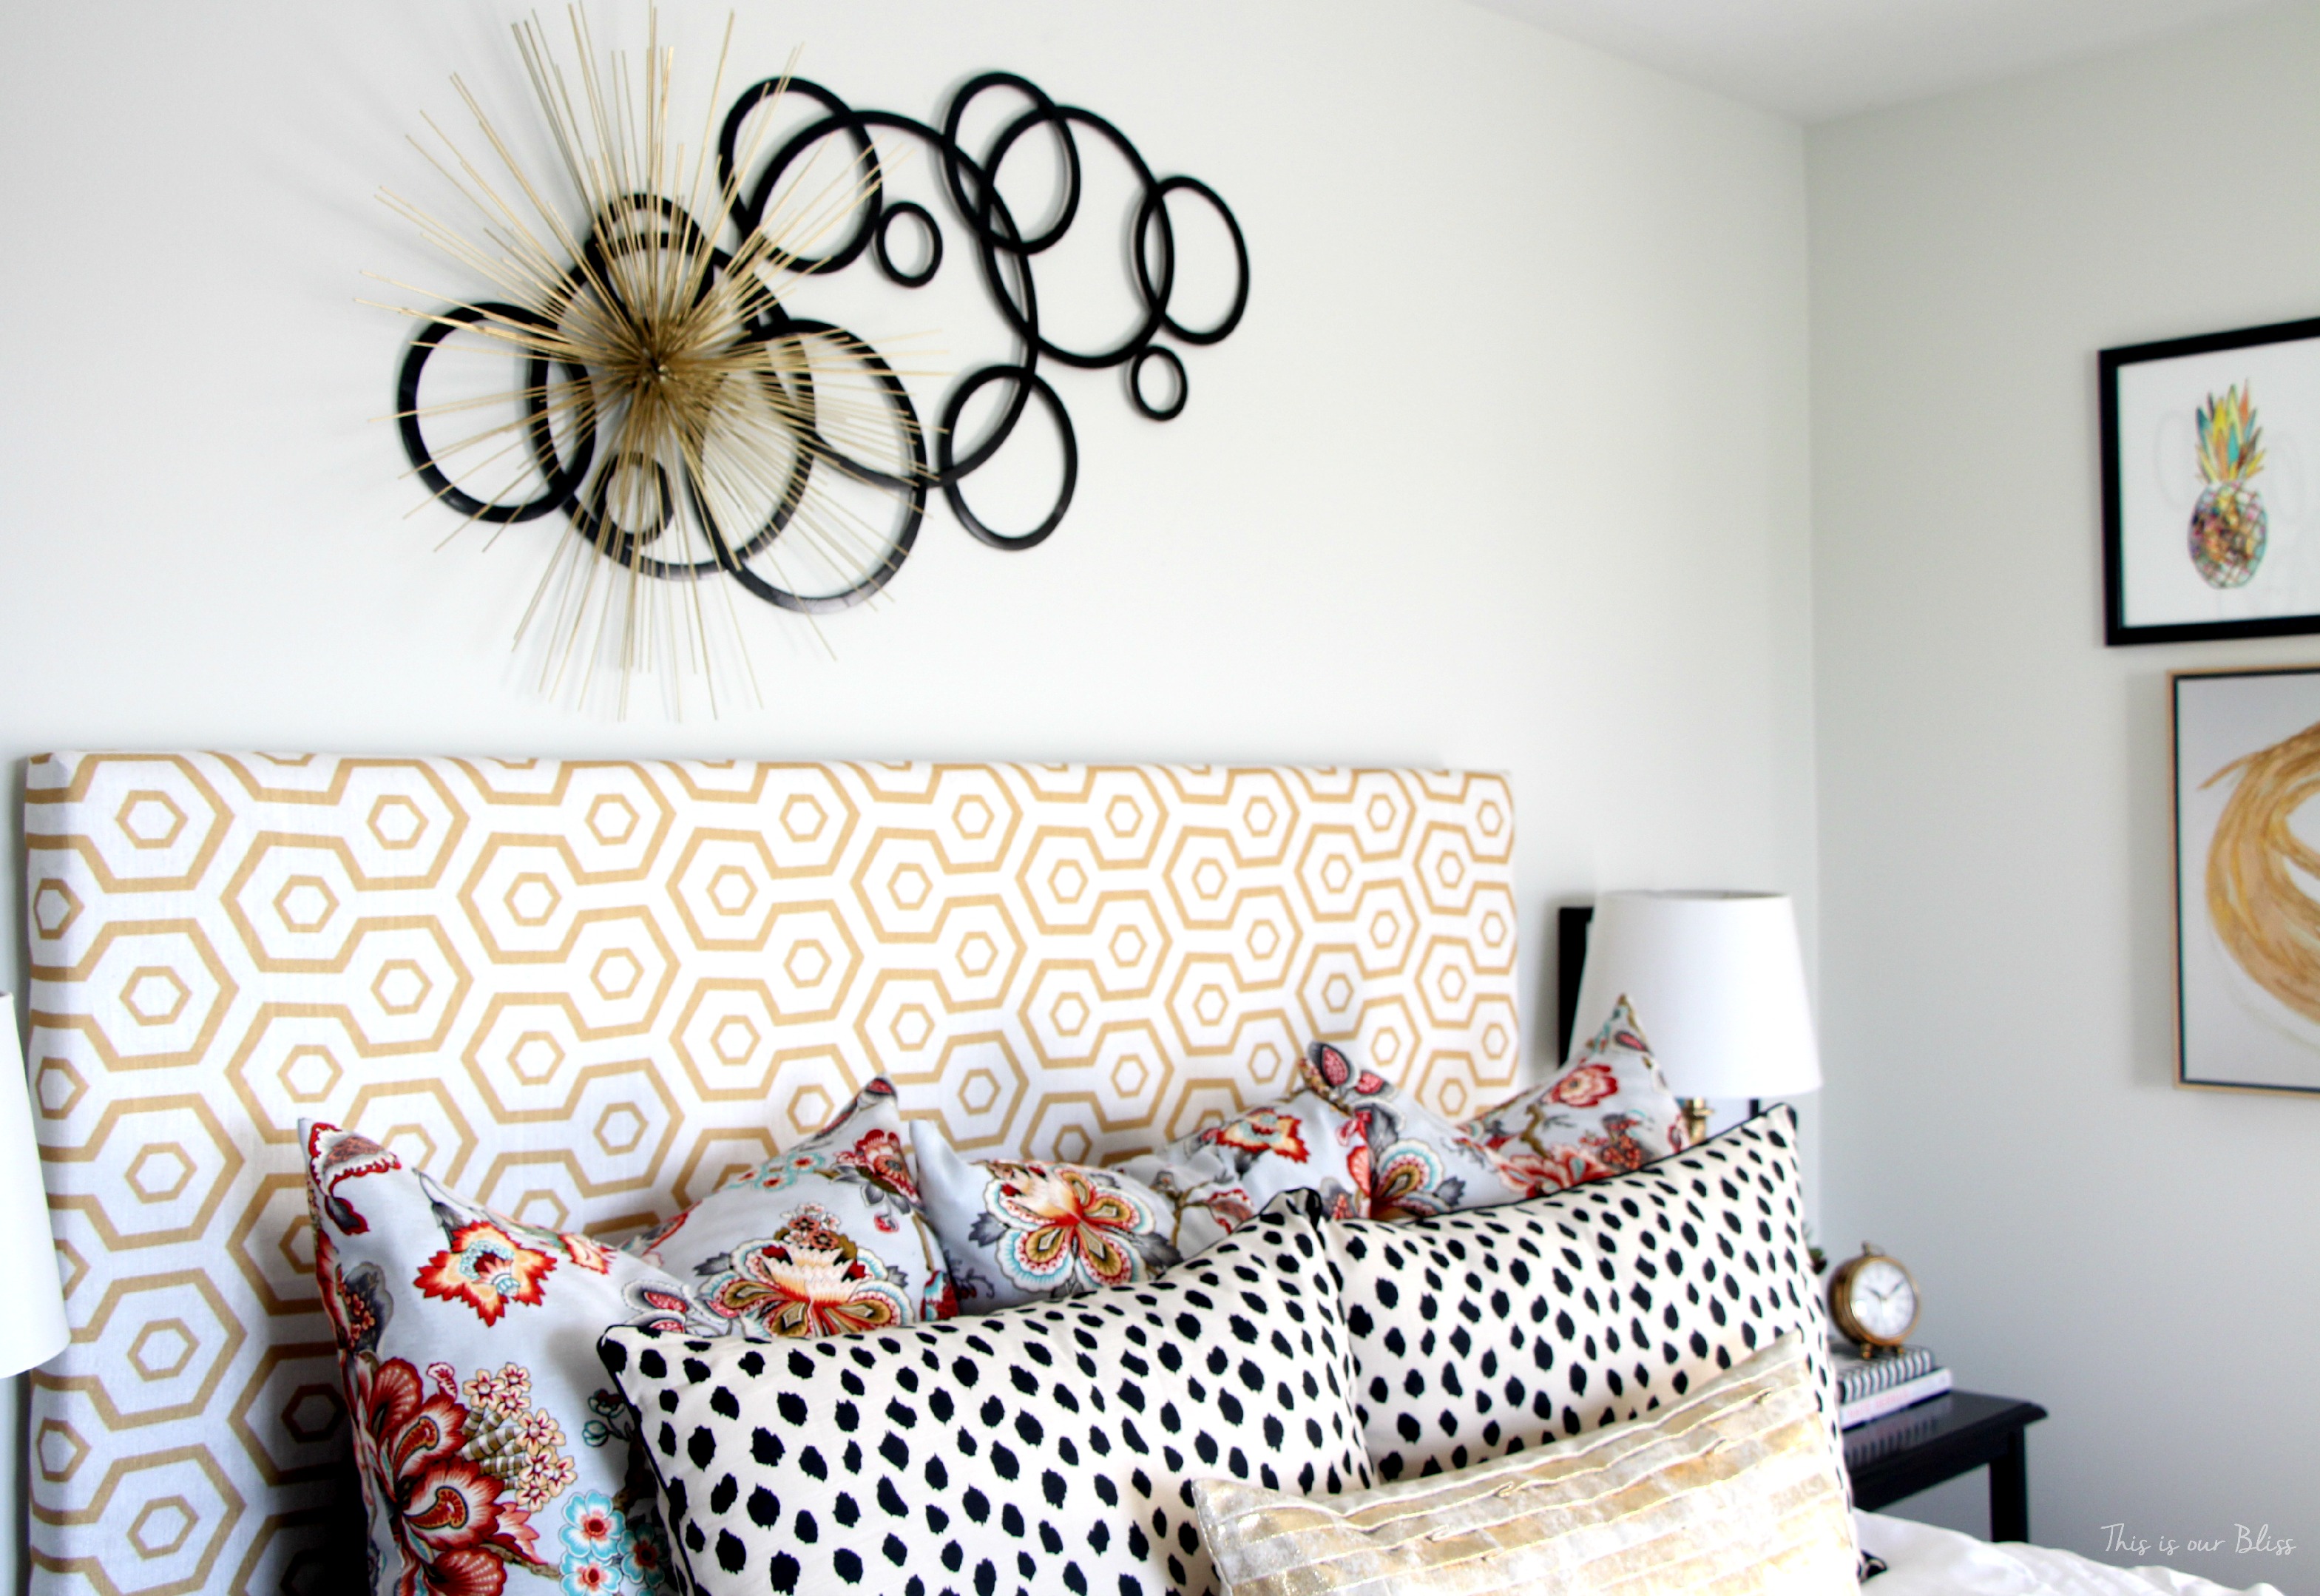 Guestroom revamp - pattern play - floral, dalmation, geo, gold - This is our Bliss